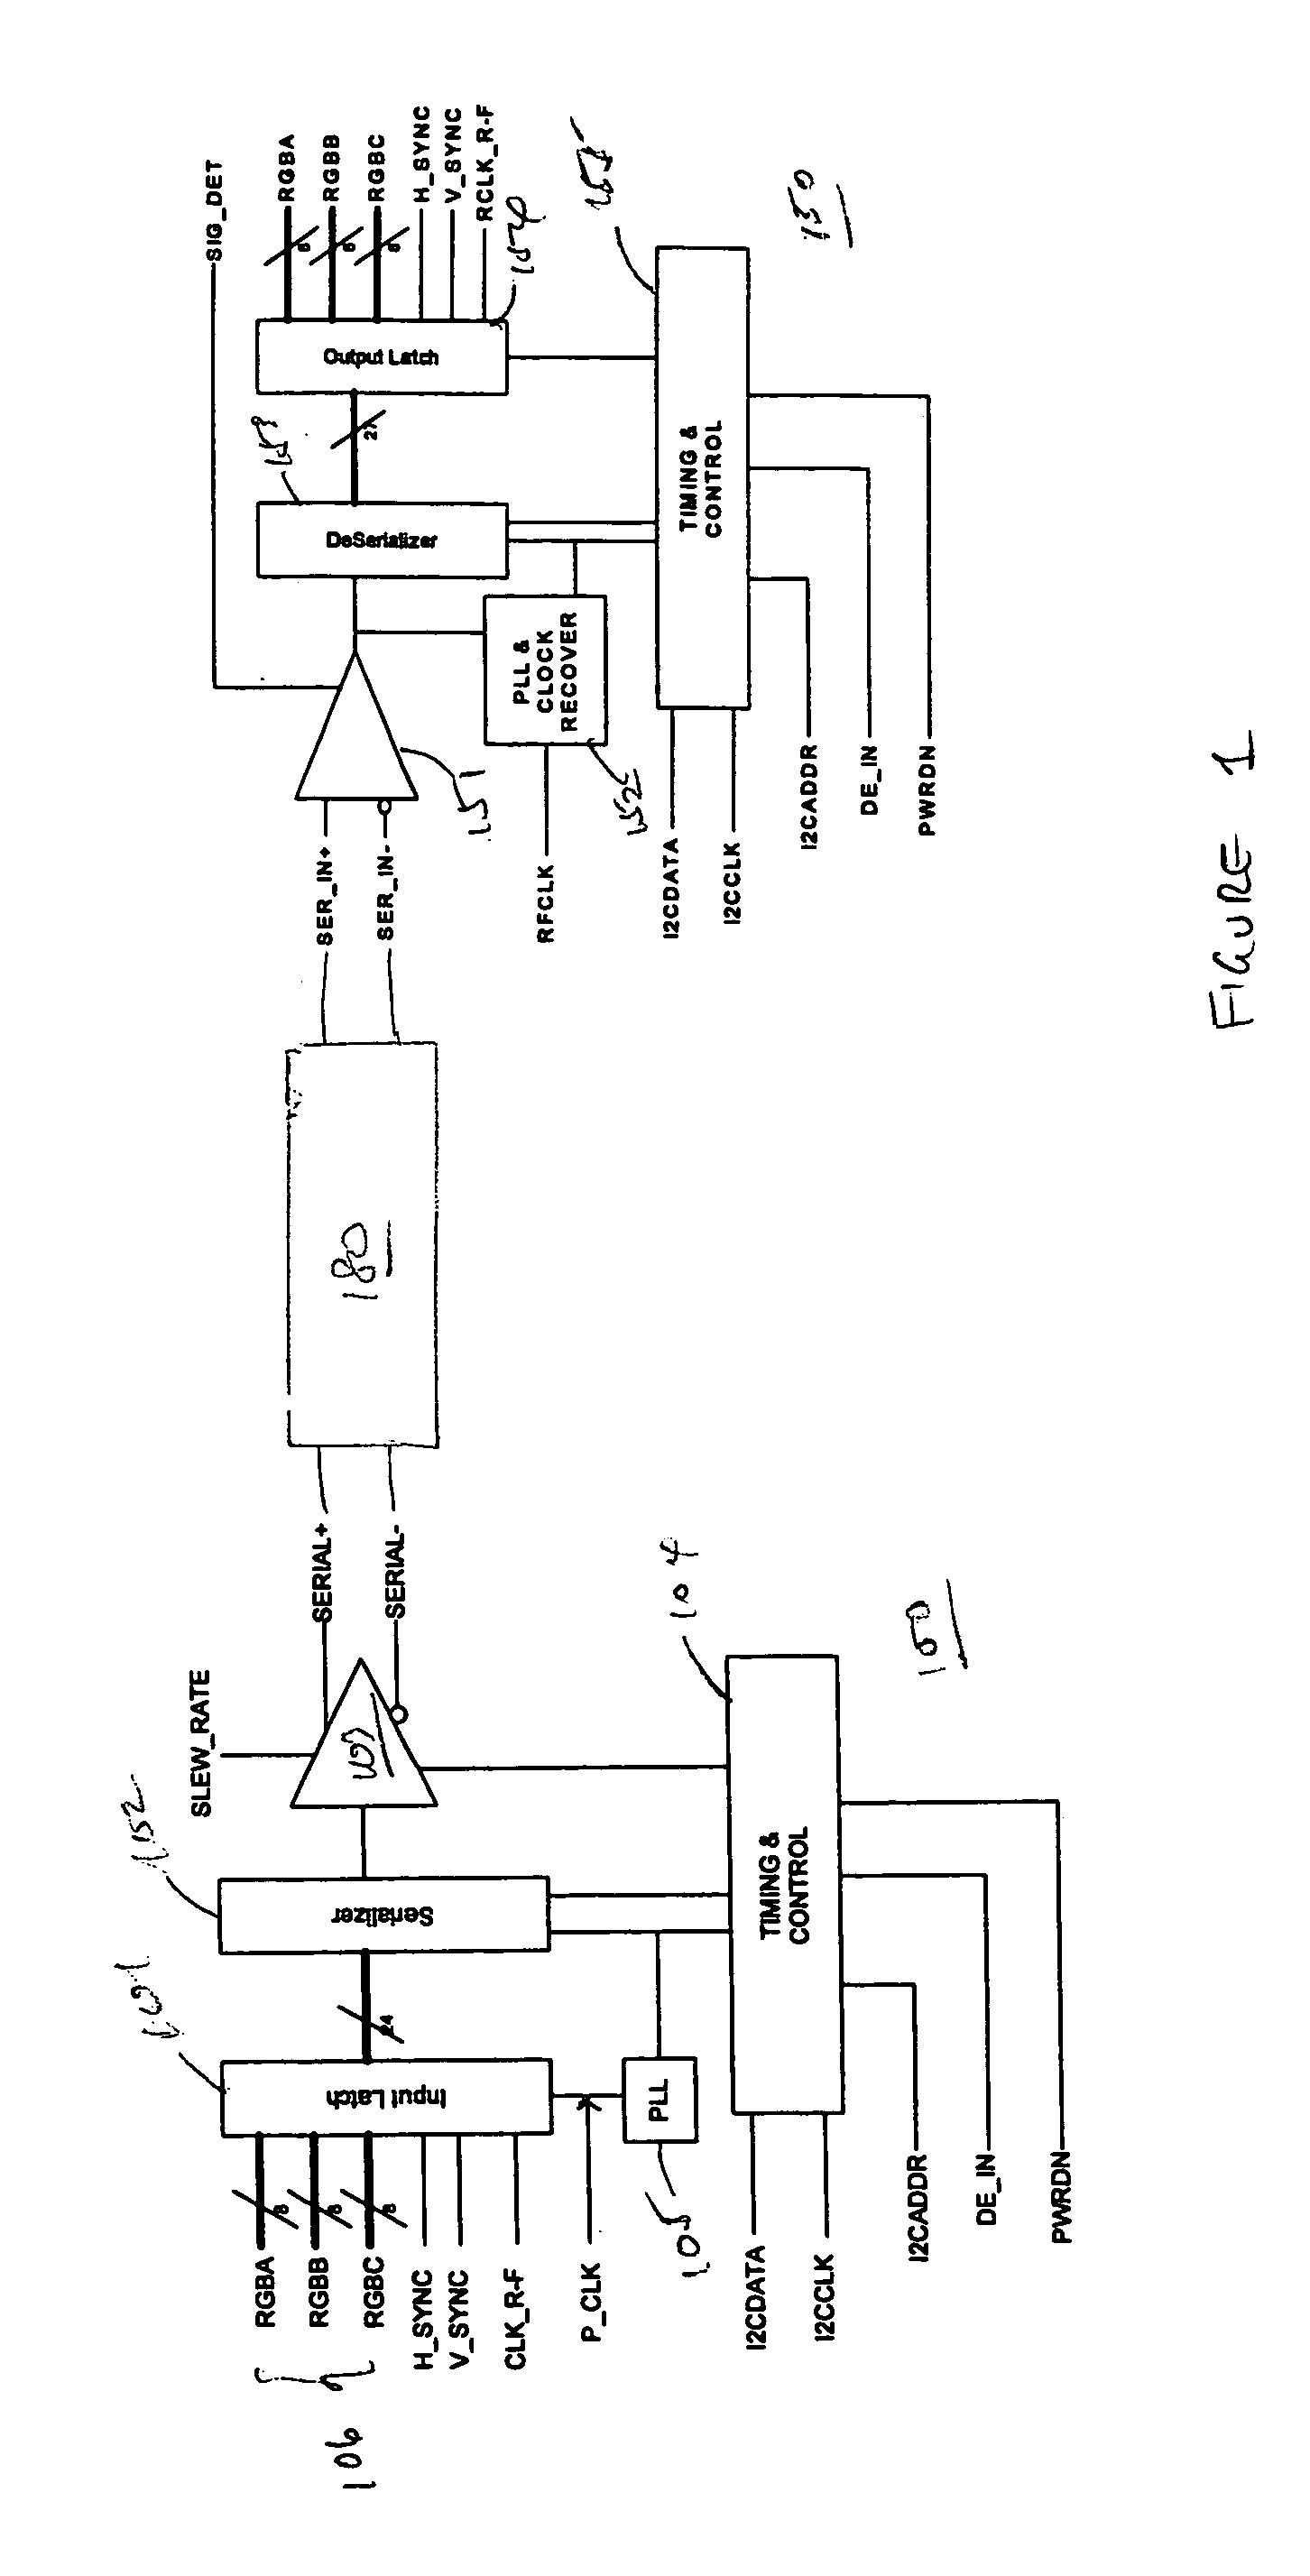 Method and system for data transmission and recovery